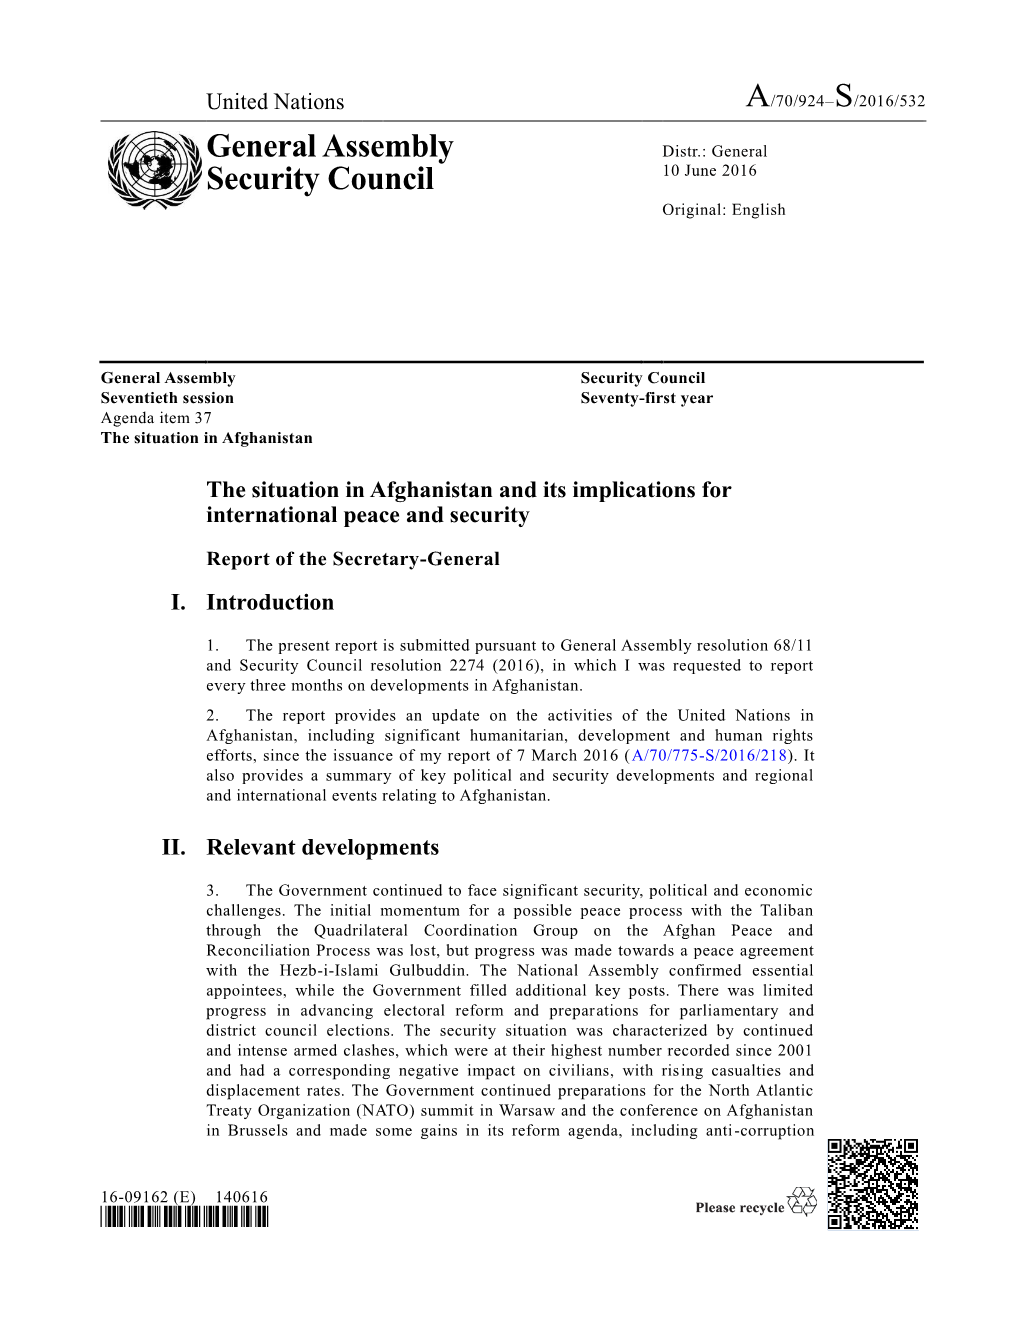 General Assembly Security Council Seventieth Session Seventy-First Year Agenda Item 37 the Situation in Afghanistan